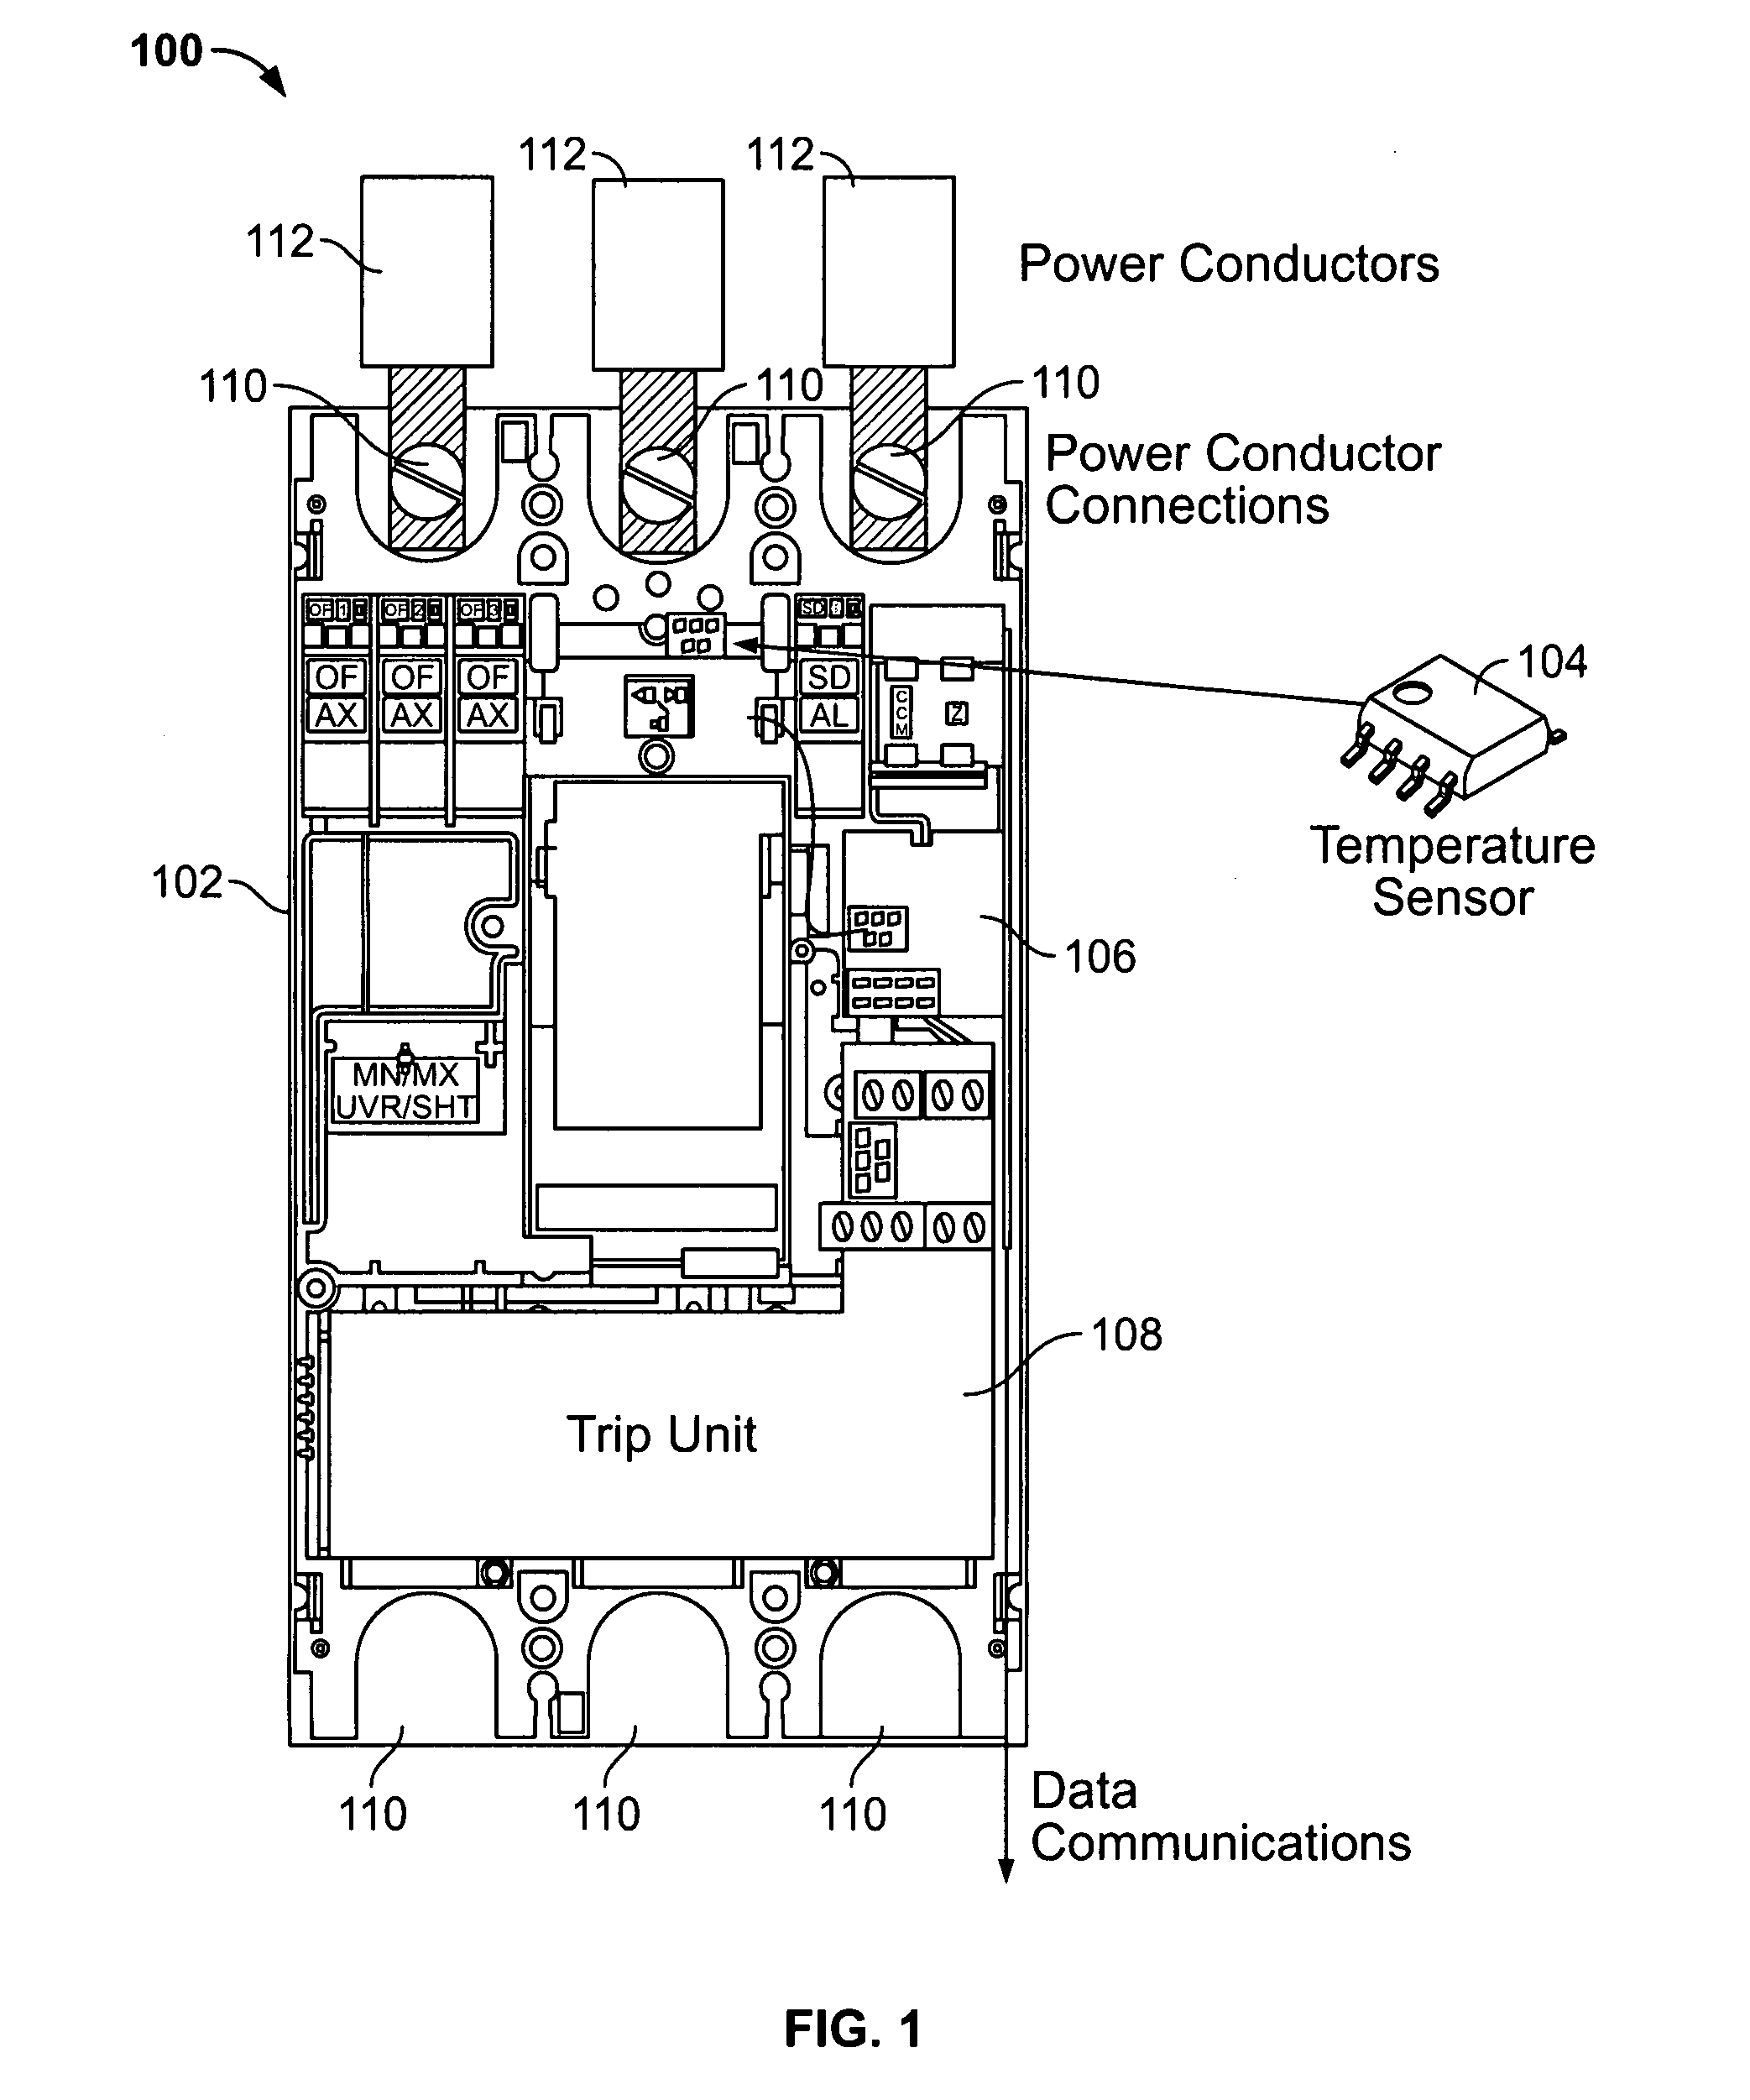 Circuit breaker integral temperature monitoring for advance detection of defective power conductor connections